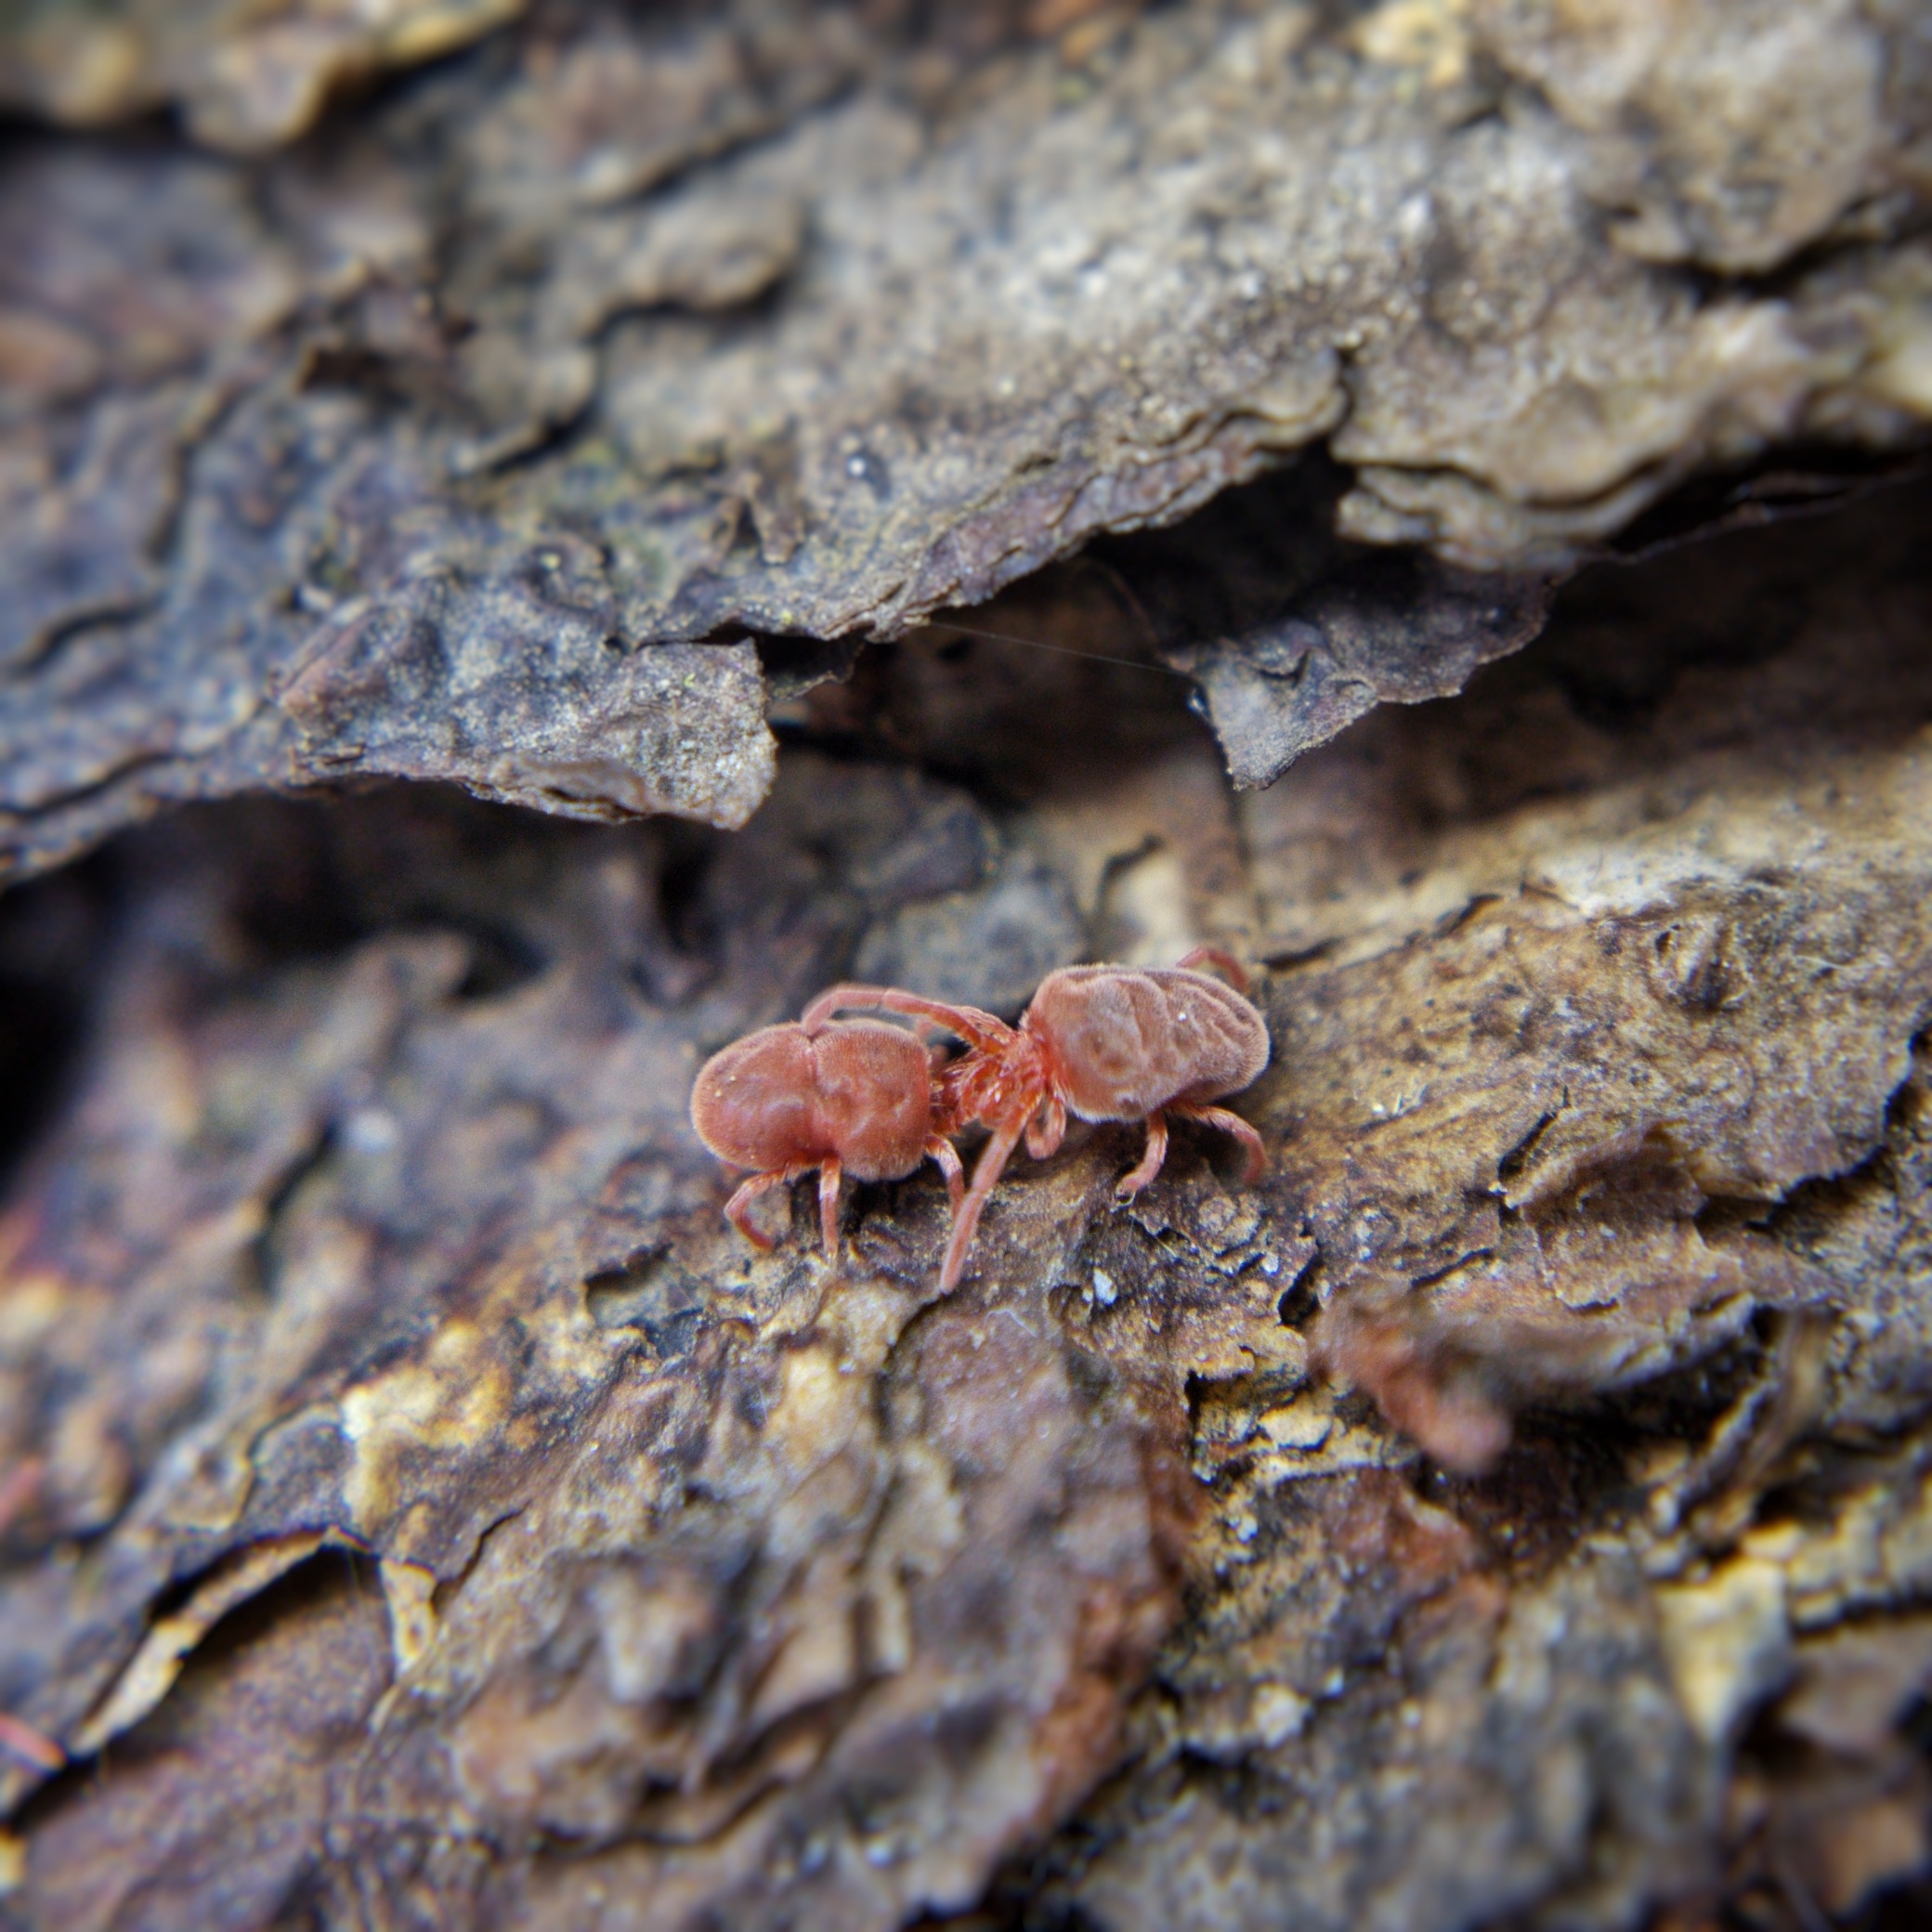 Two red velvet mites grappling, front legs locked together, on flaky tree bark